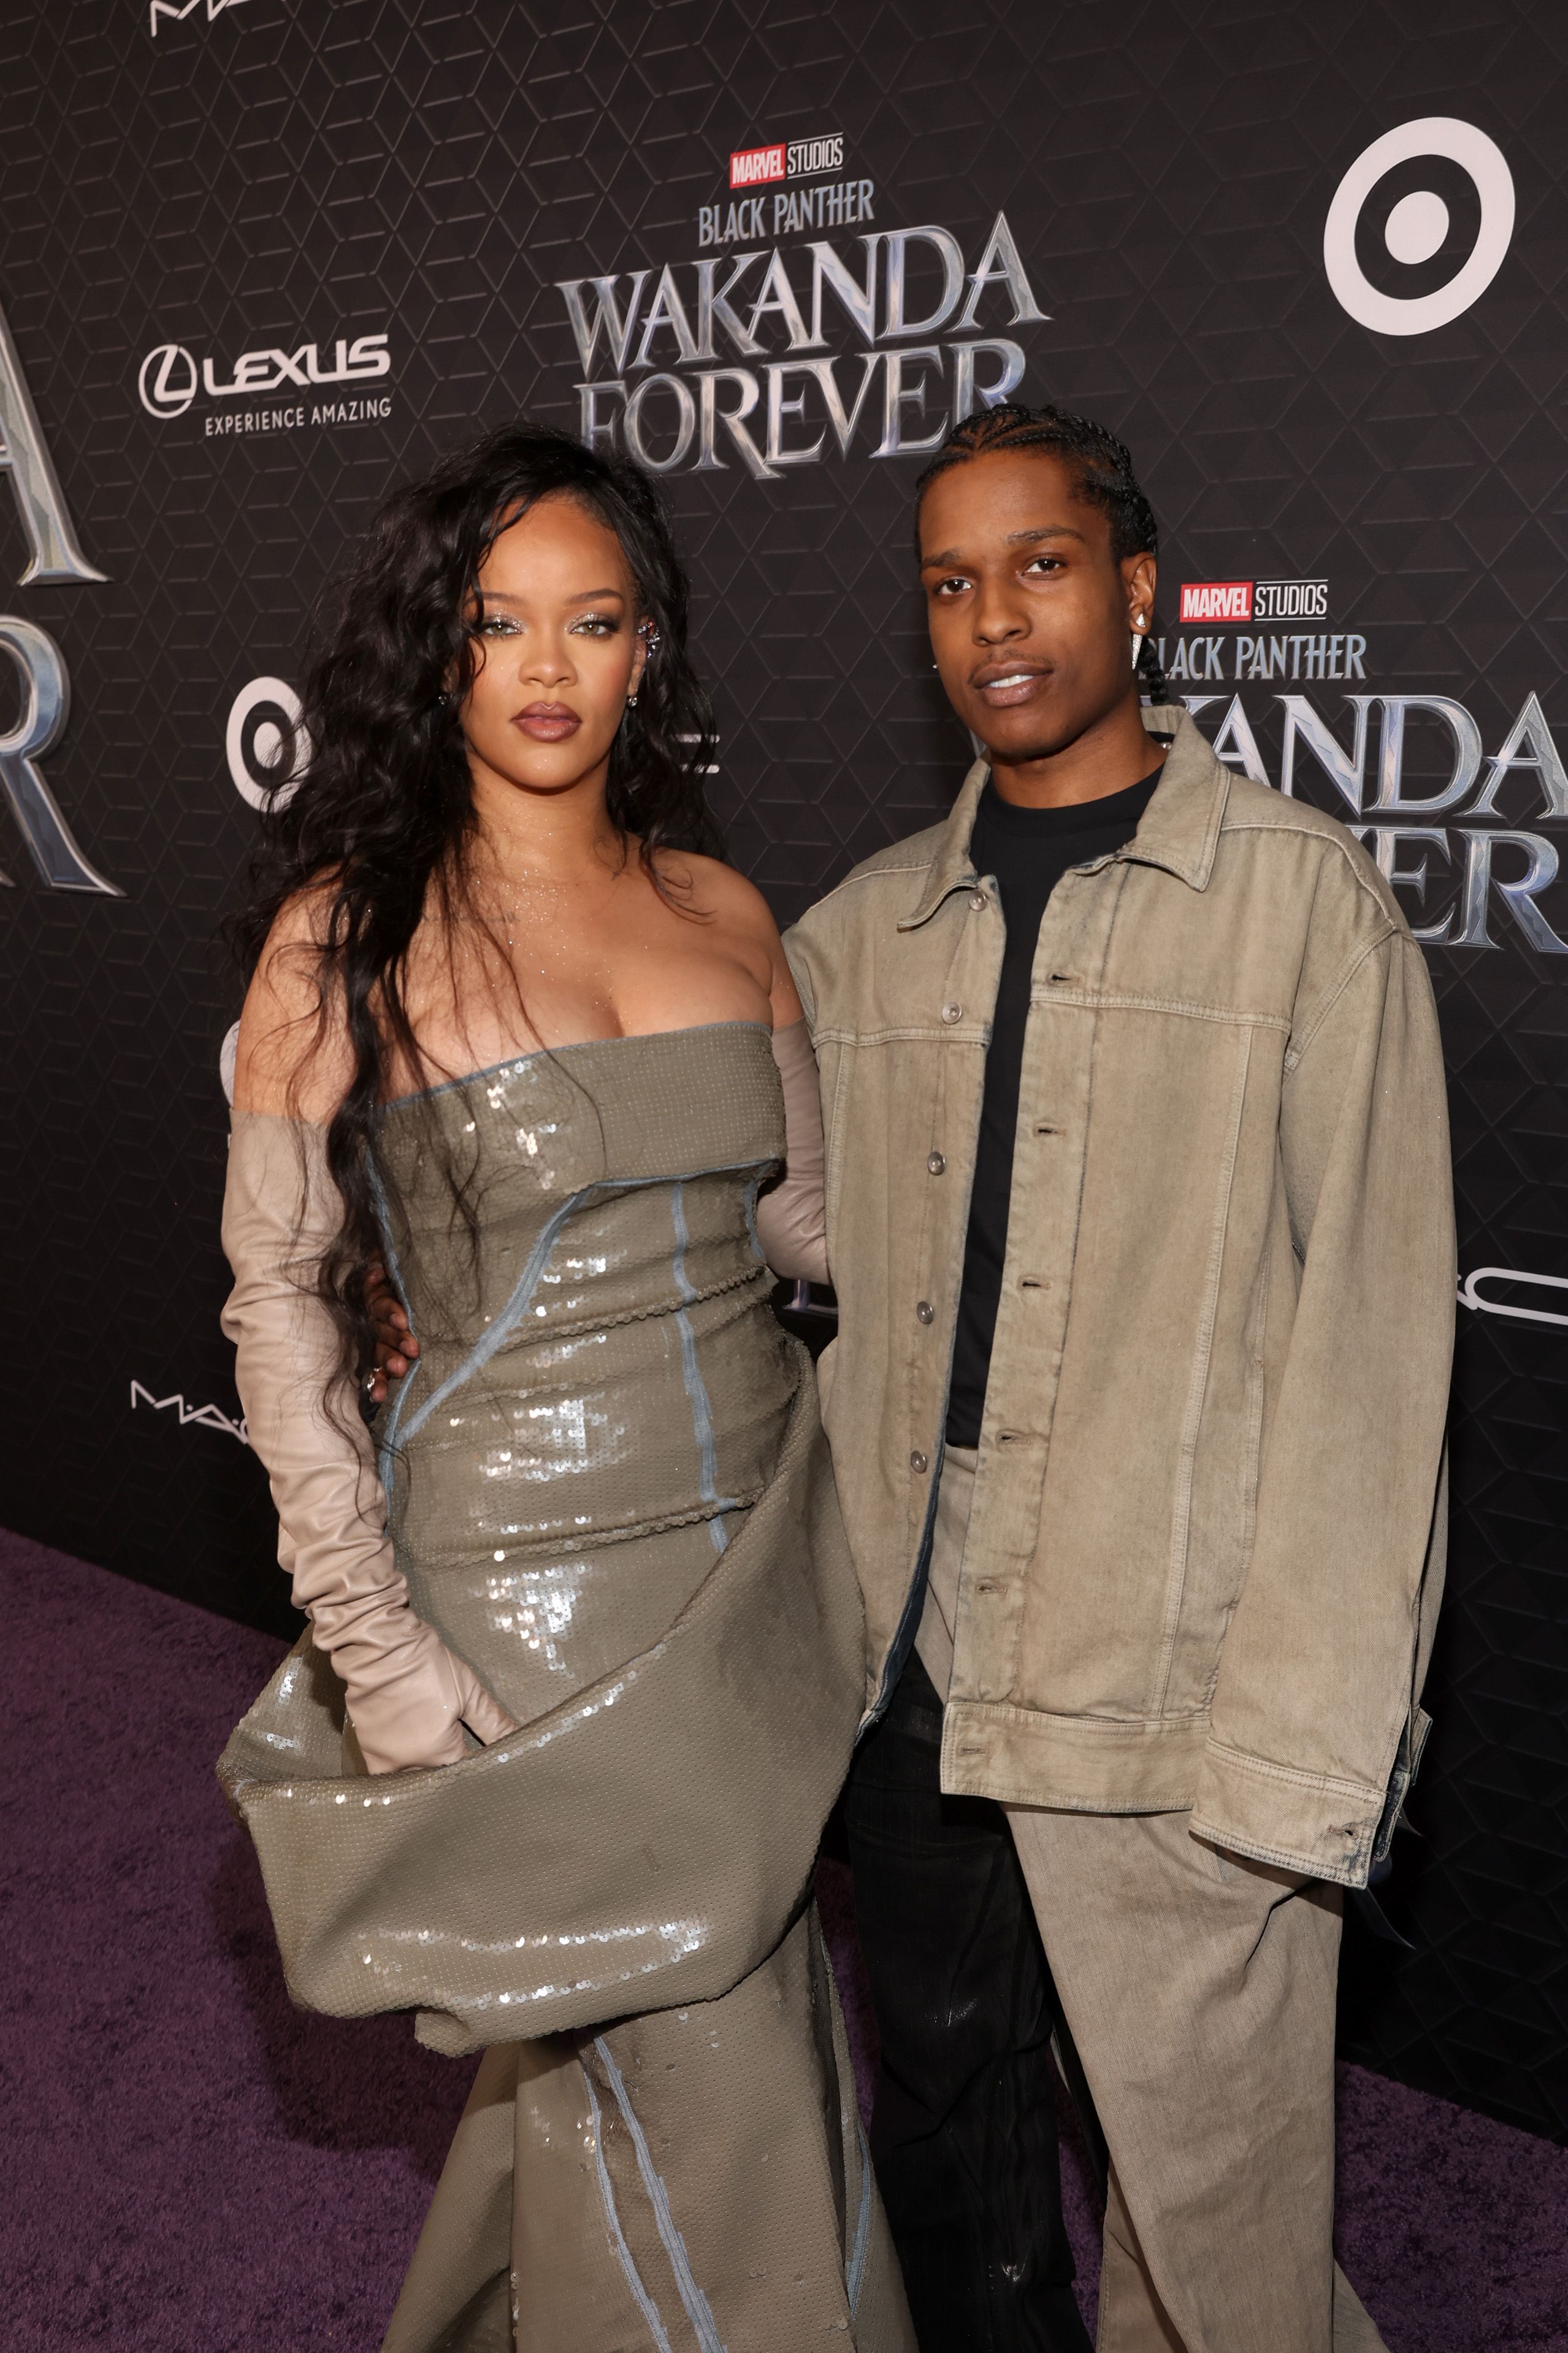 Rihanna and A$AP Rocky attend the Black Panther: Wakanda Forever World Premiere at the El Capitan Theatre in Hollywood, California on October 26, 2022. (Photo by Jesse Grant/Getty Images for Disney)